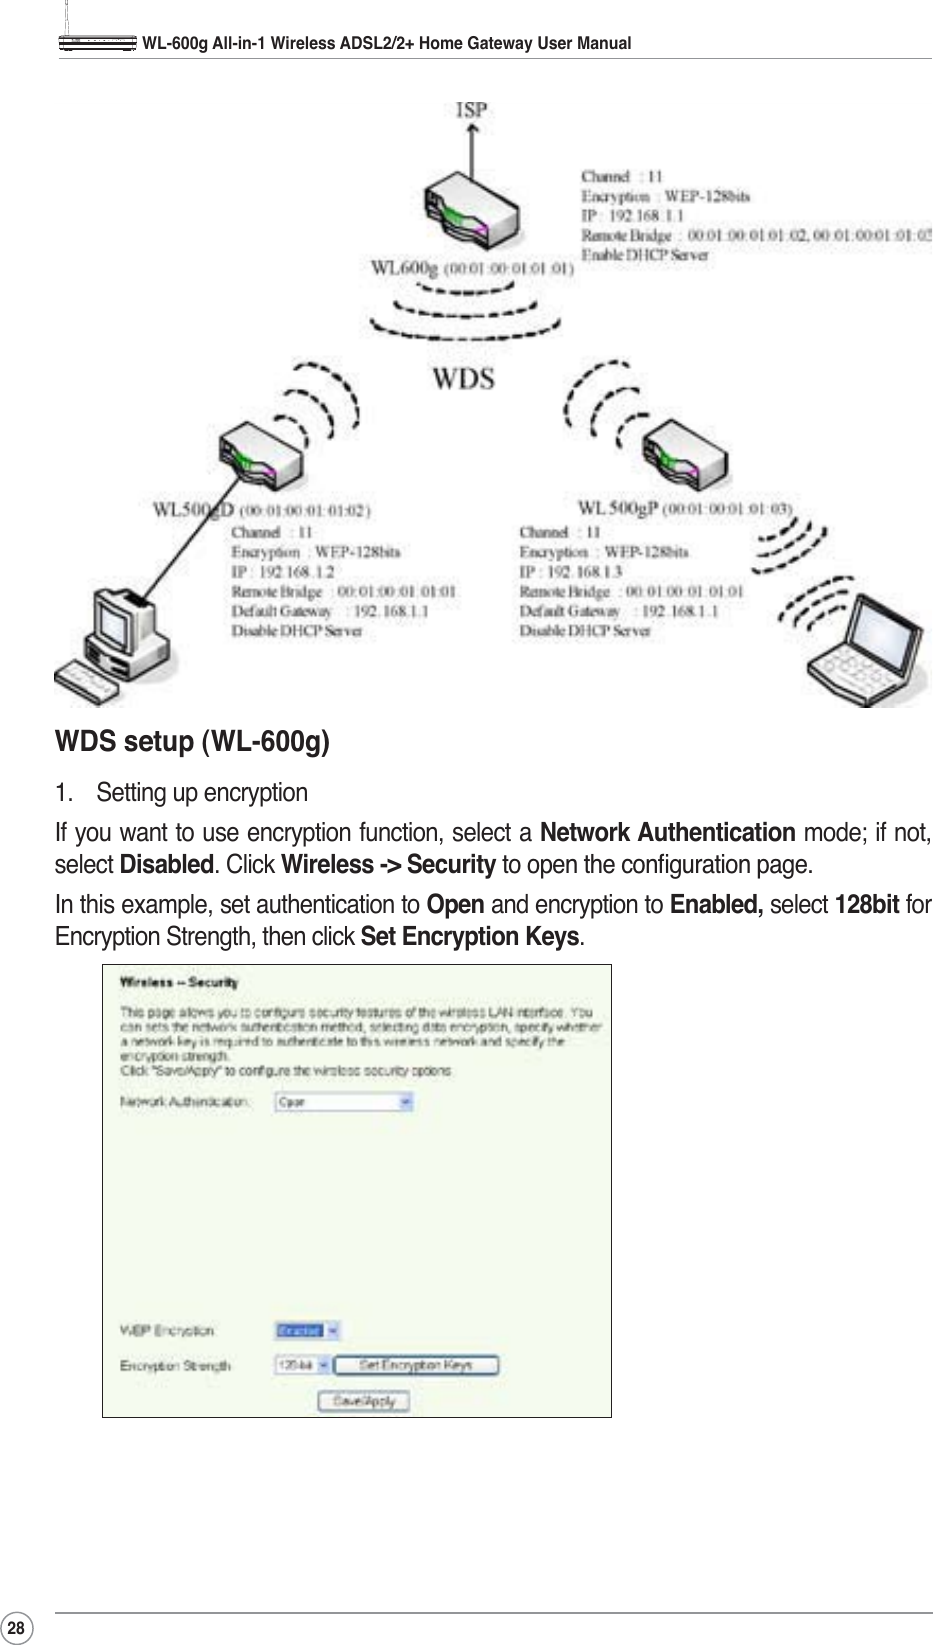 WL-600g All-in-1 Wireless ADSL2/2+ Home Gateway User Manual28:&apos;6VHWXS:/J1. Setting up encryptionIf you want to use encryption function, select a Network Authentication mode; if not, select Disabled. Click Wireless -&gt; SecurityWRRSHQWKHFRQÀJXUDWLRQSDJHIn this example, set authentication to Open and encryption to Enabled, select 128bit for Encryption Strength, then click Set Encryption Keys. 